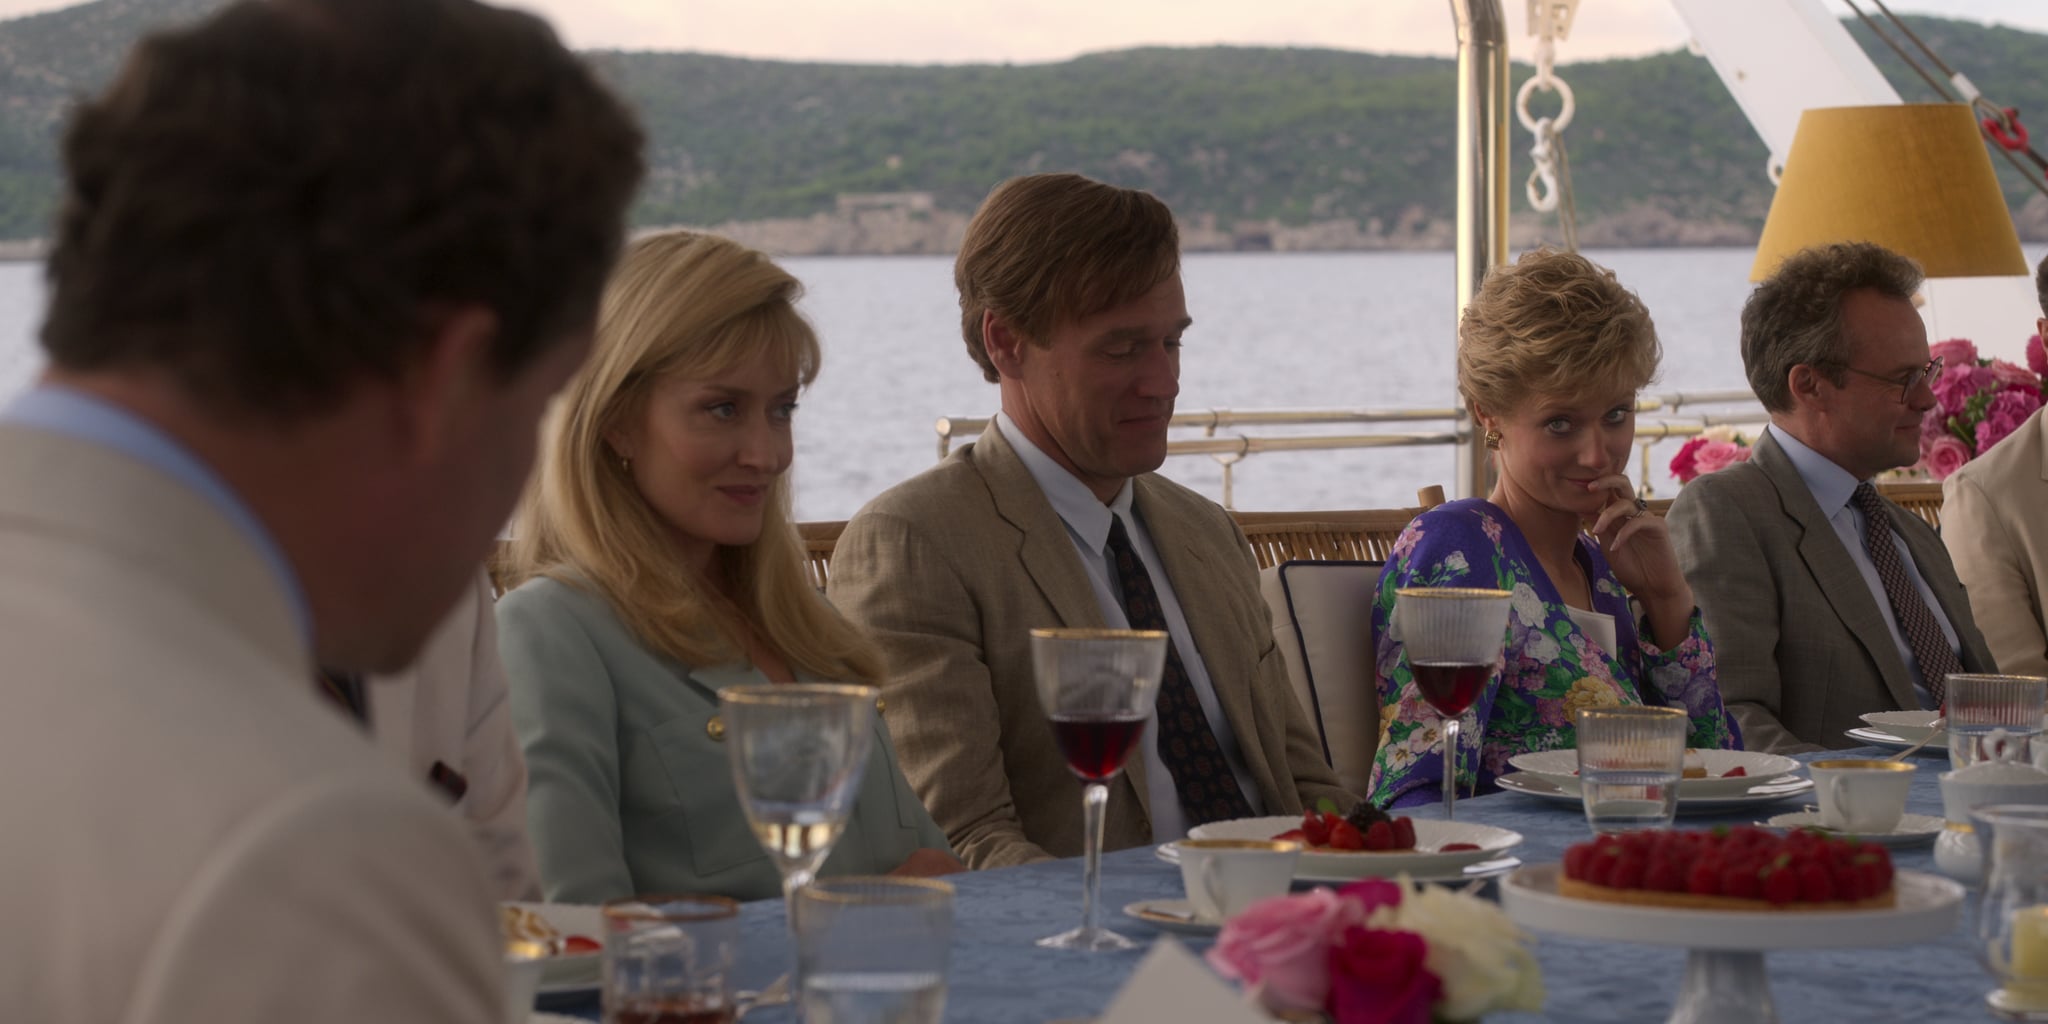 the Crown season 5 episode 1 Princess Diana and guests on the yacht